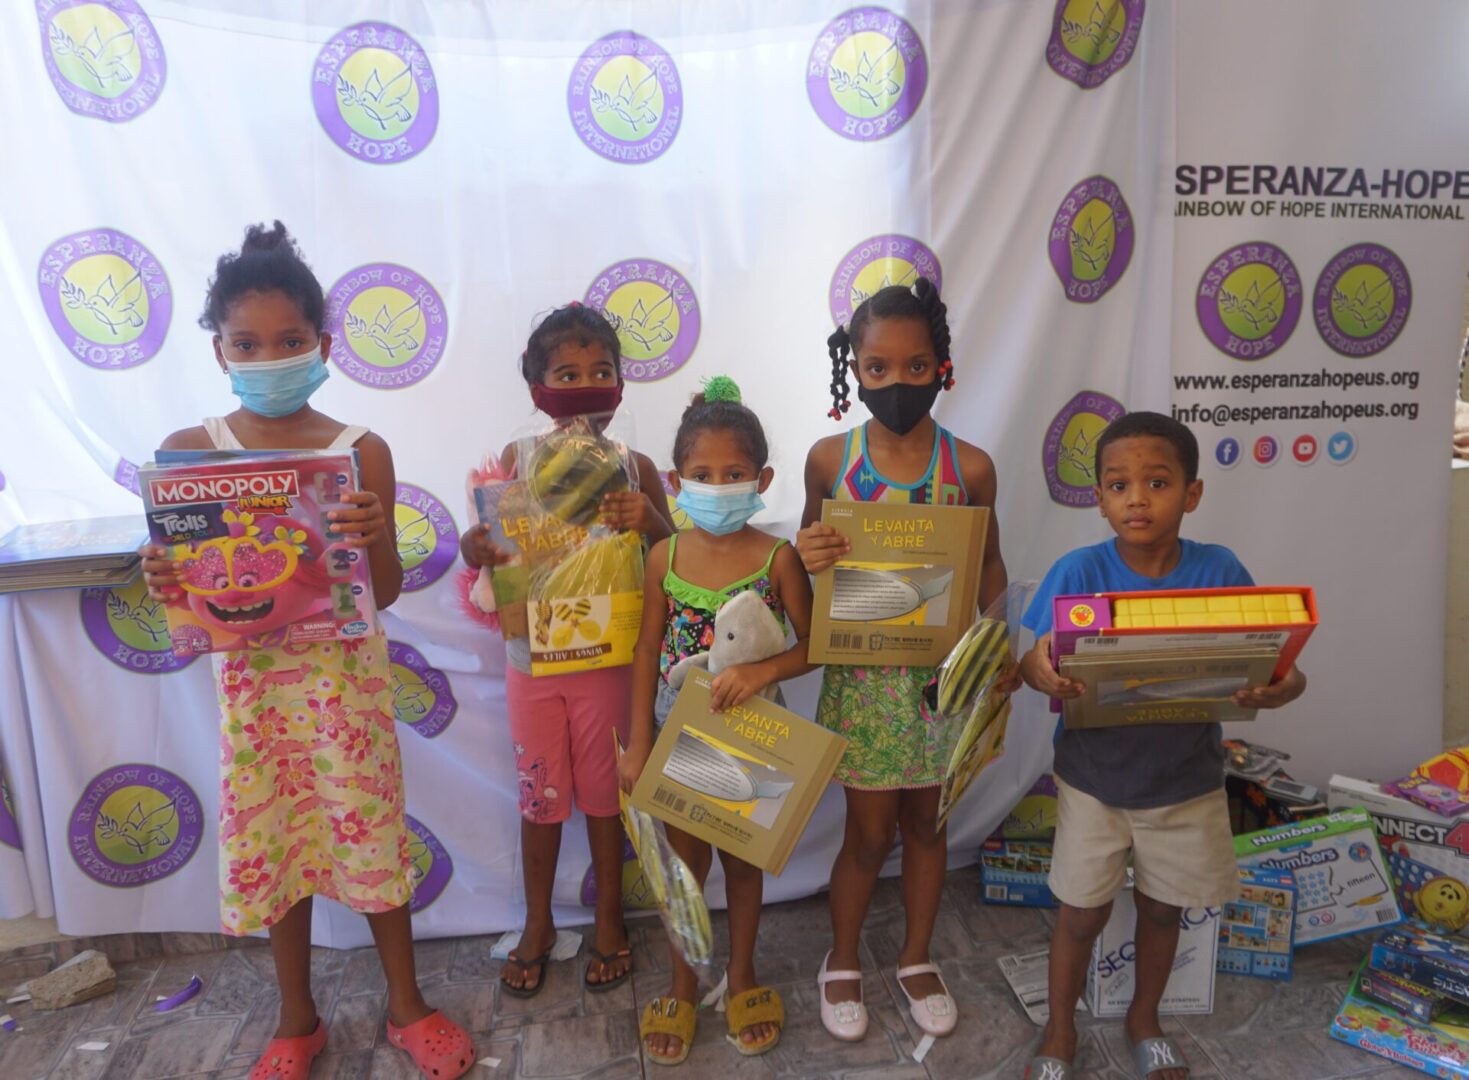 Five children standing against the Esperanza-Hope backdrop with their toys and books, batch 7